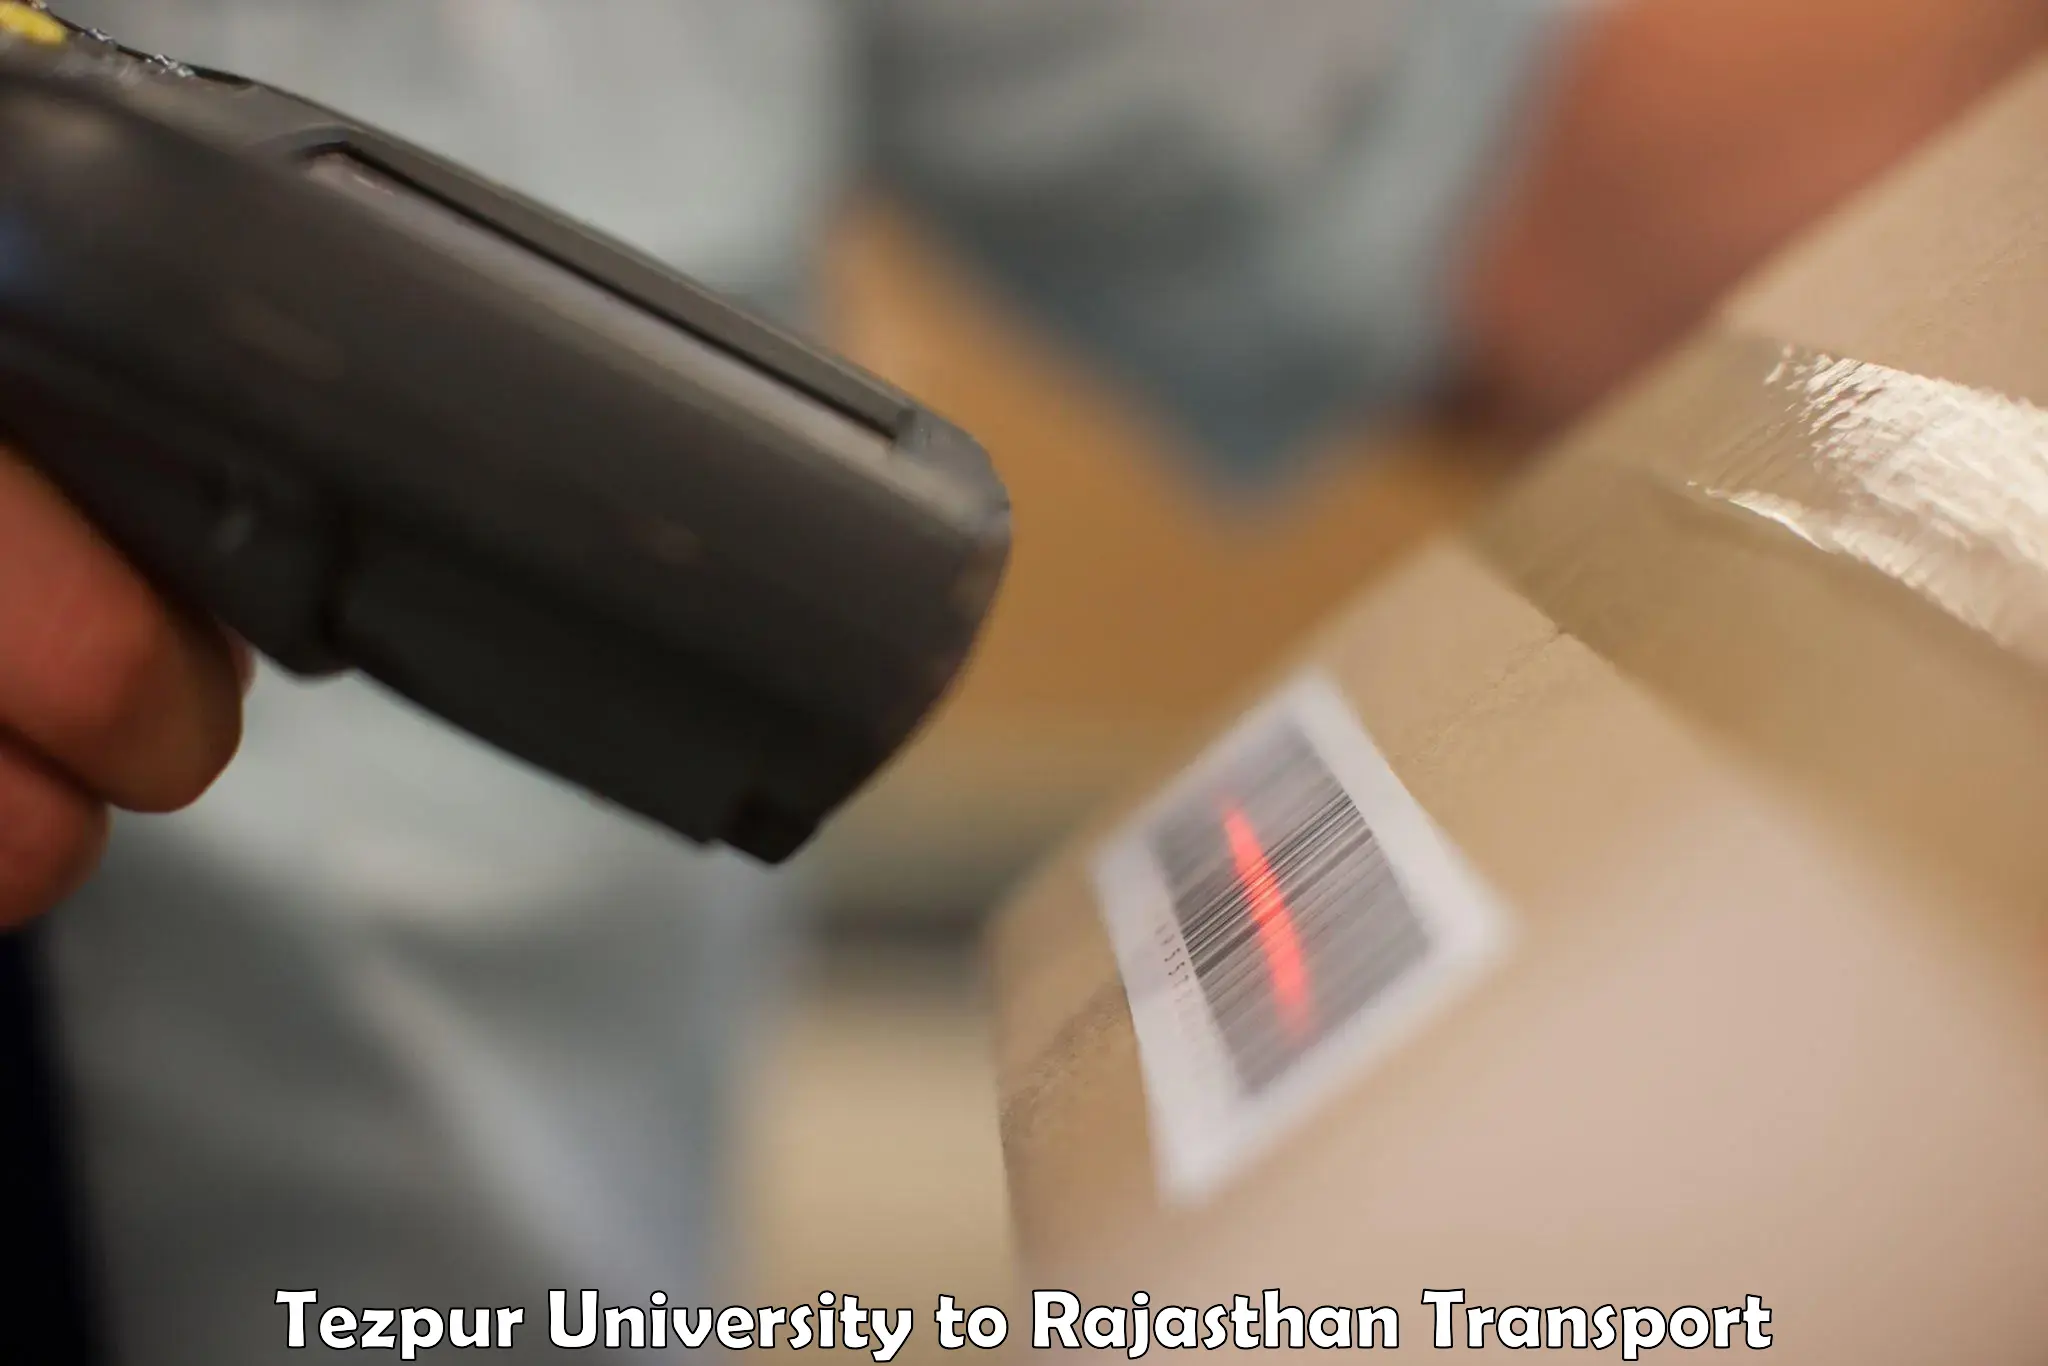 Air freight transport services in Tezpur University to Khanpur